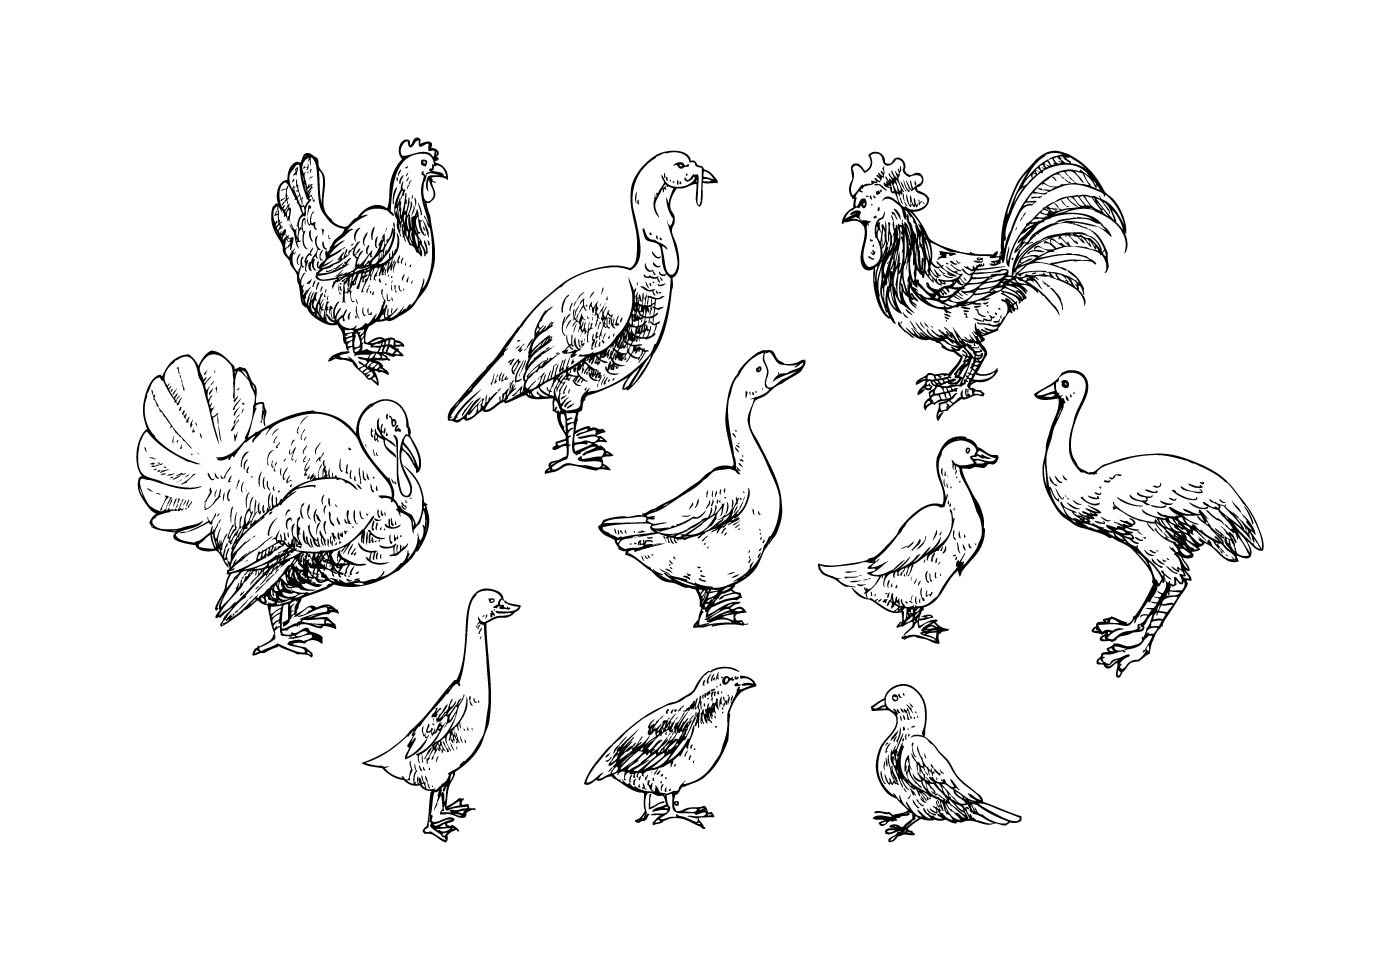 Free Poultry Sketch Icon Vector - Download Free Vectors ...